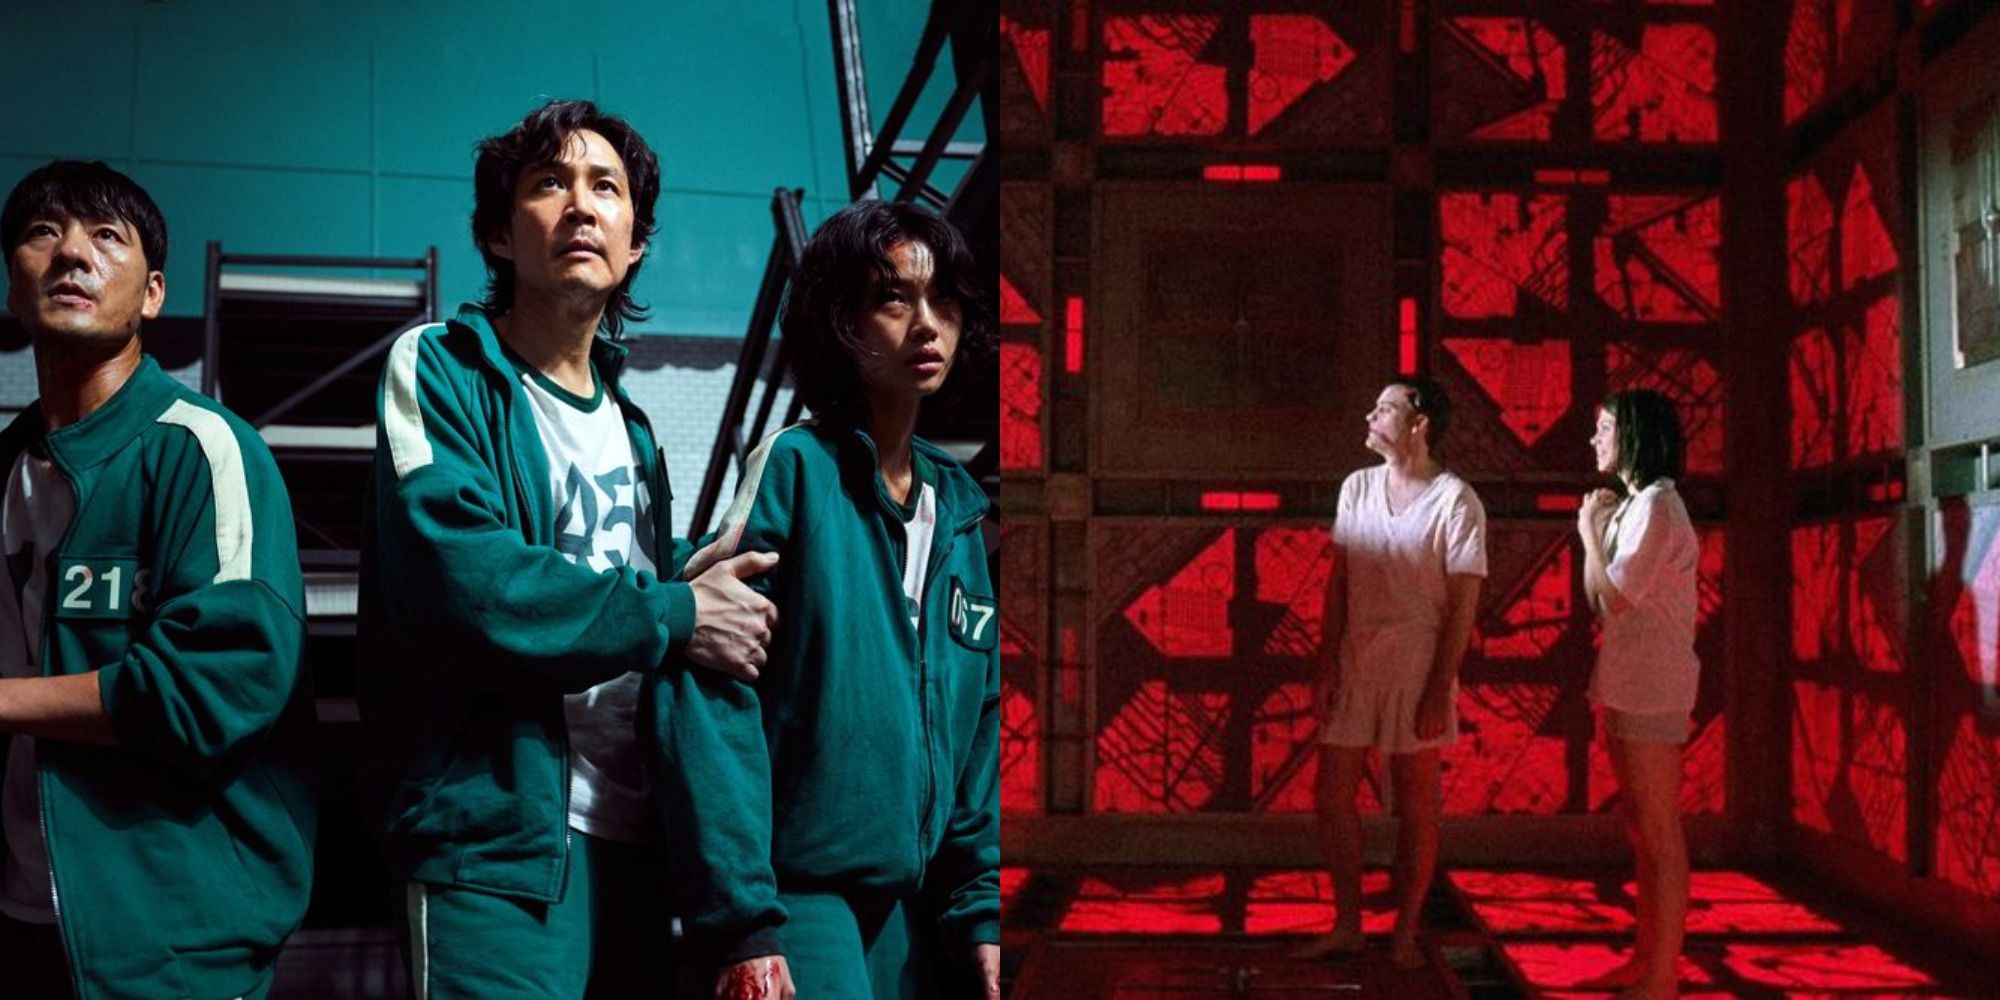 12 Intense Thriller Shows and Movies to Watch If You Like Squid